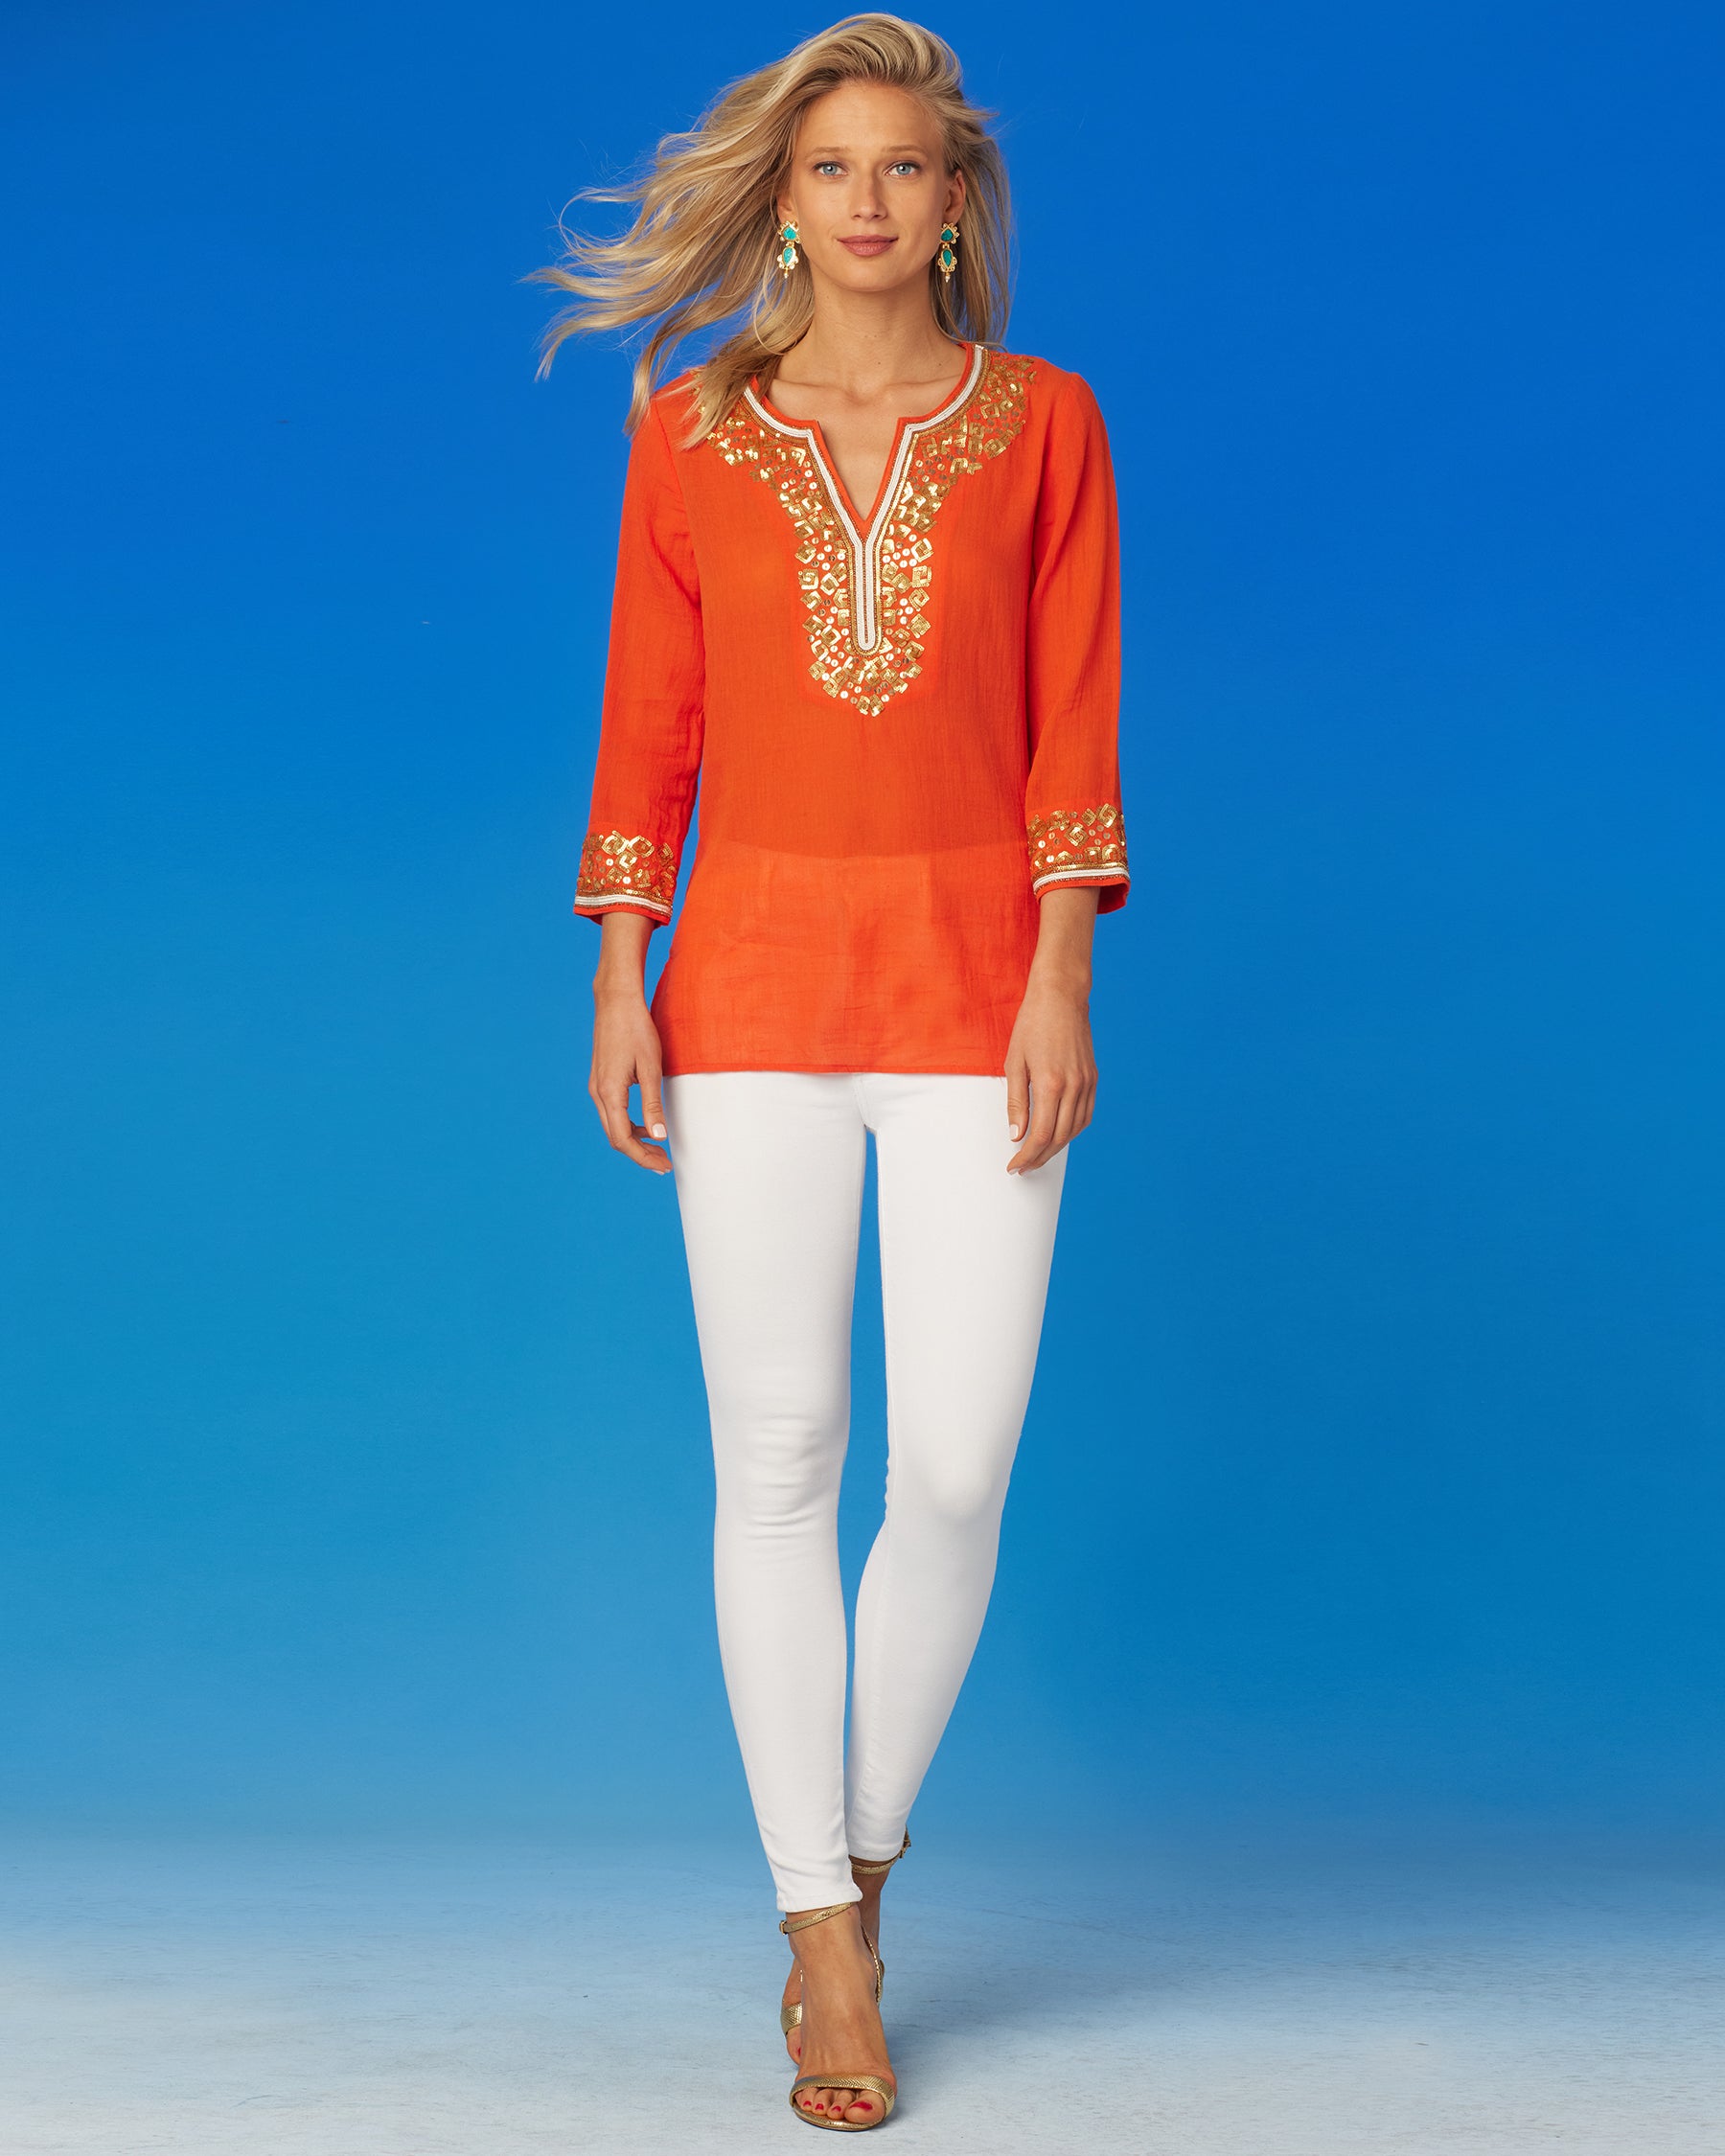 Alba Cover-Up Tunic in Coral Orange and Embellishment-Full Length